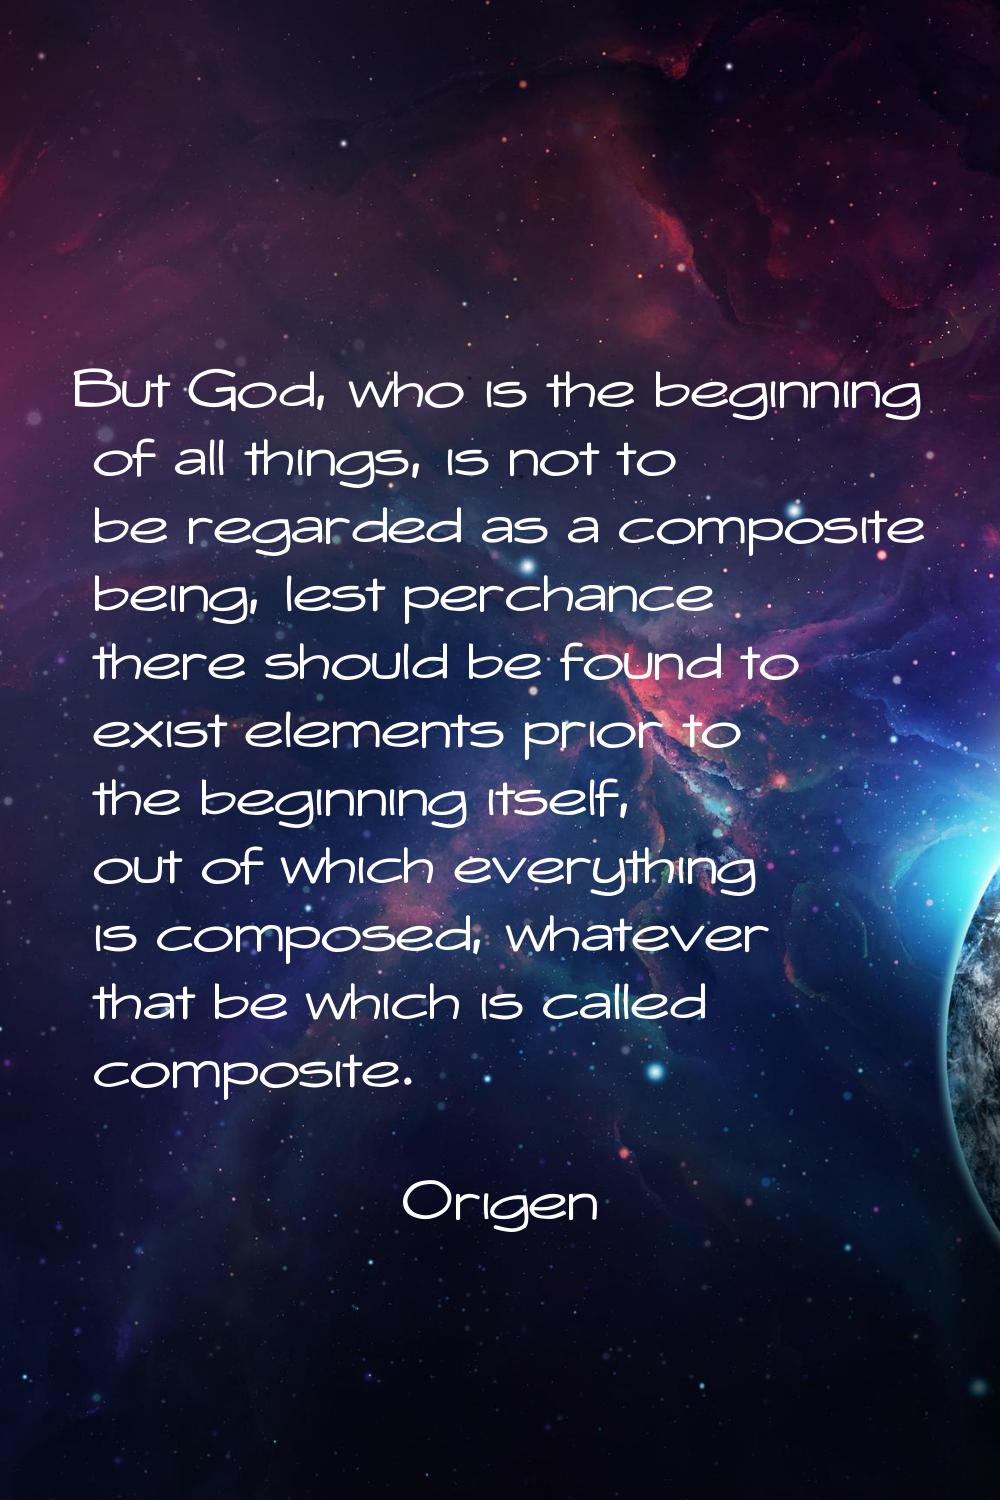 But God, who is the beginning of all things, is not to be regarded as a composite being, lest perch